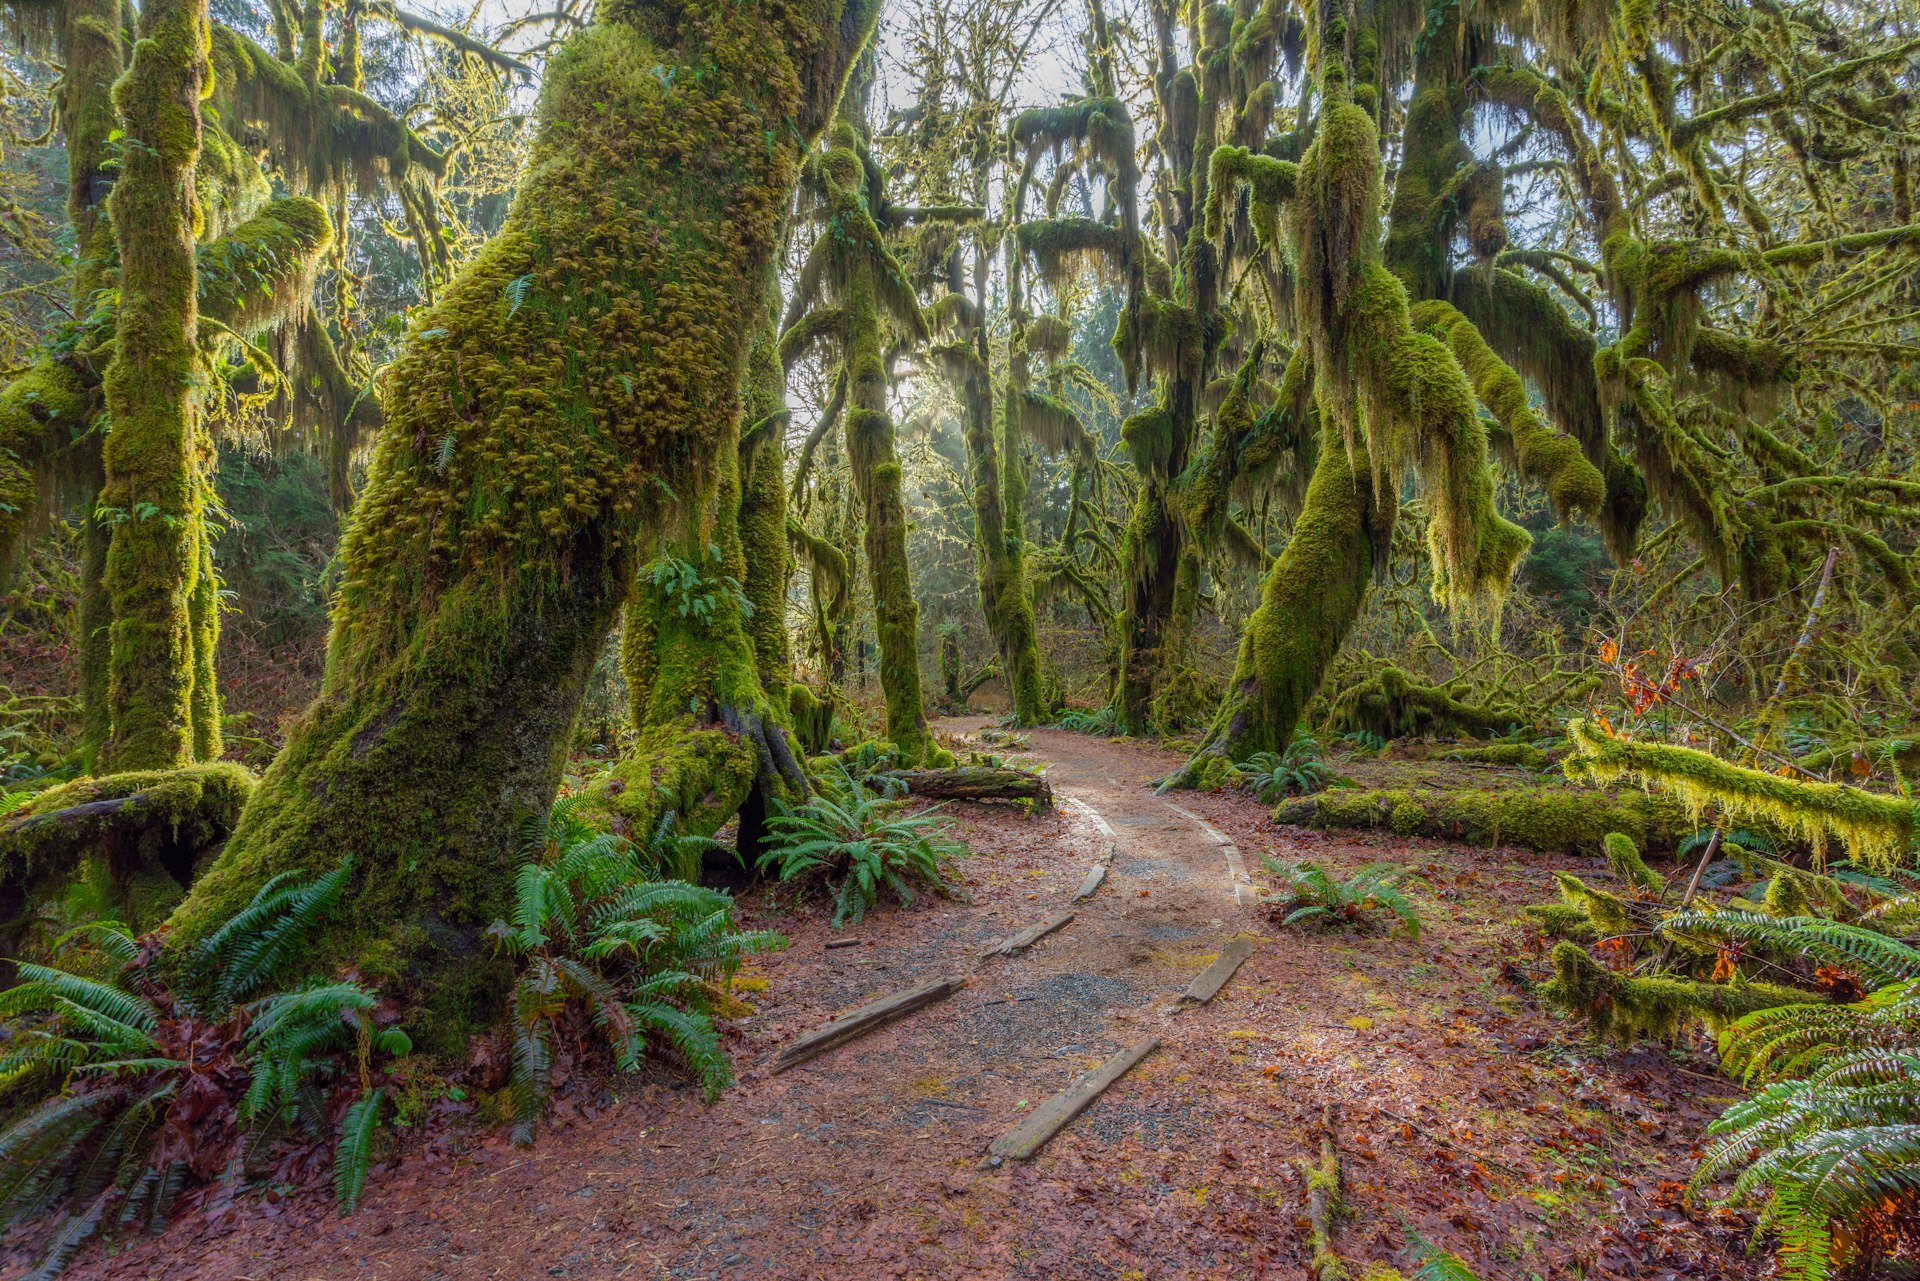 A path through the Hoh Rain Forest is filled with old temperate trees covered in green and brown moss.